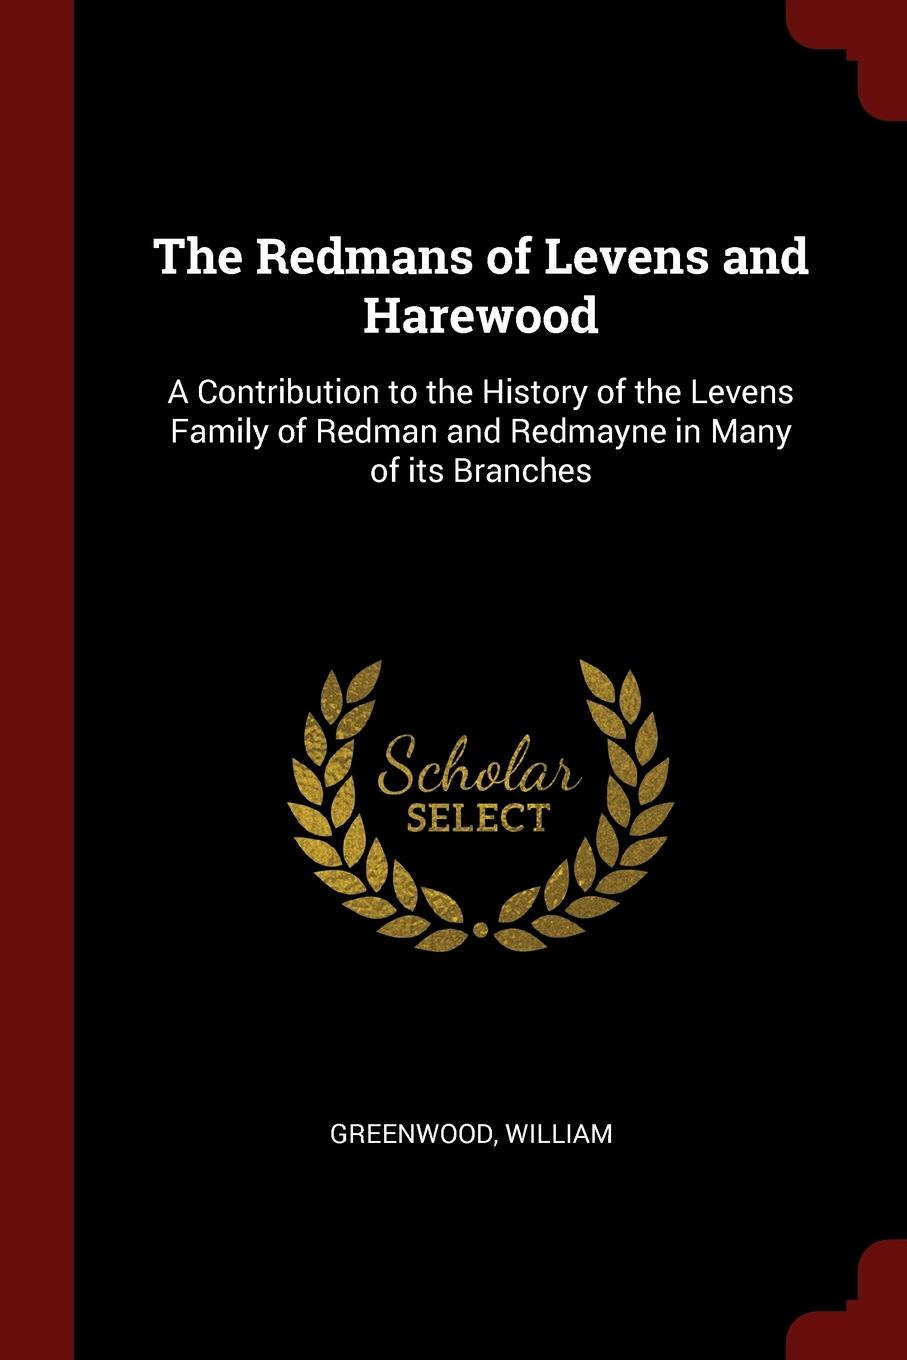 The Redmans of Levens and Harewood. A Contribution to the History of the Levens Family of Redman and Redmayne in Many of its Branches